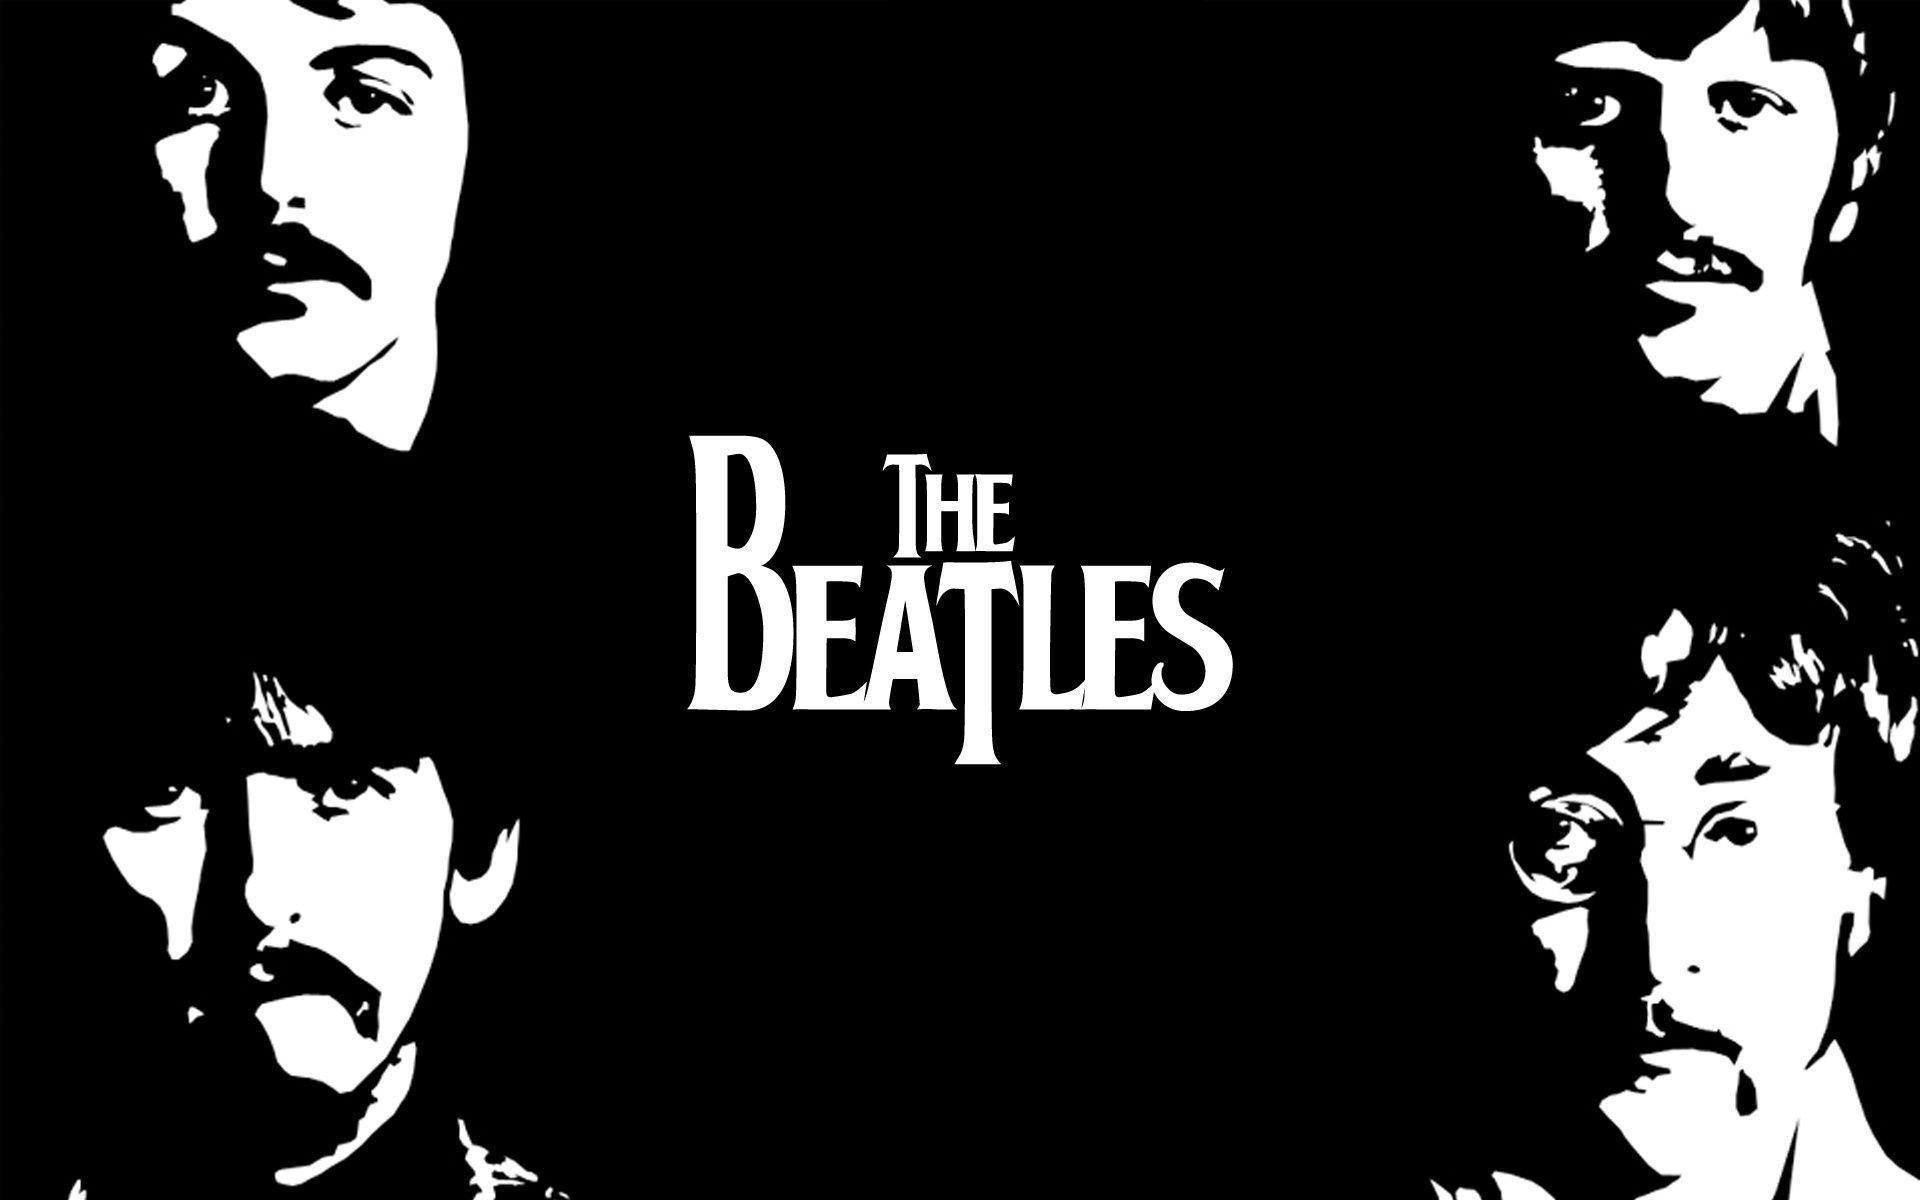 Let it be the Beatles. All things Beatlemania. Come together